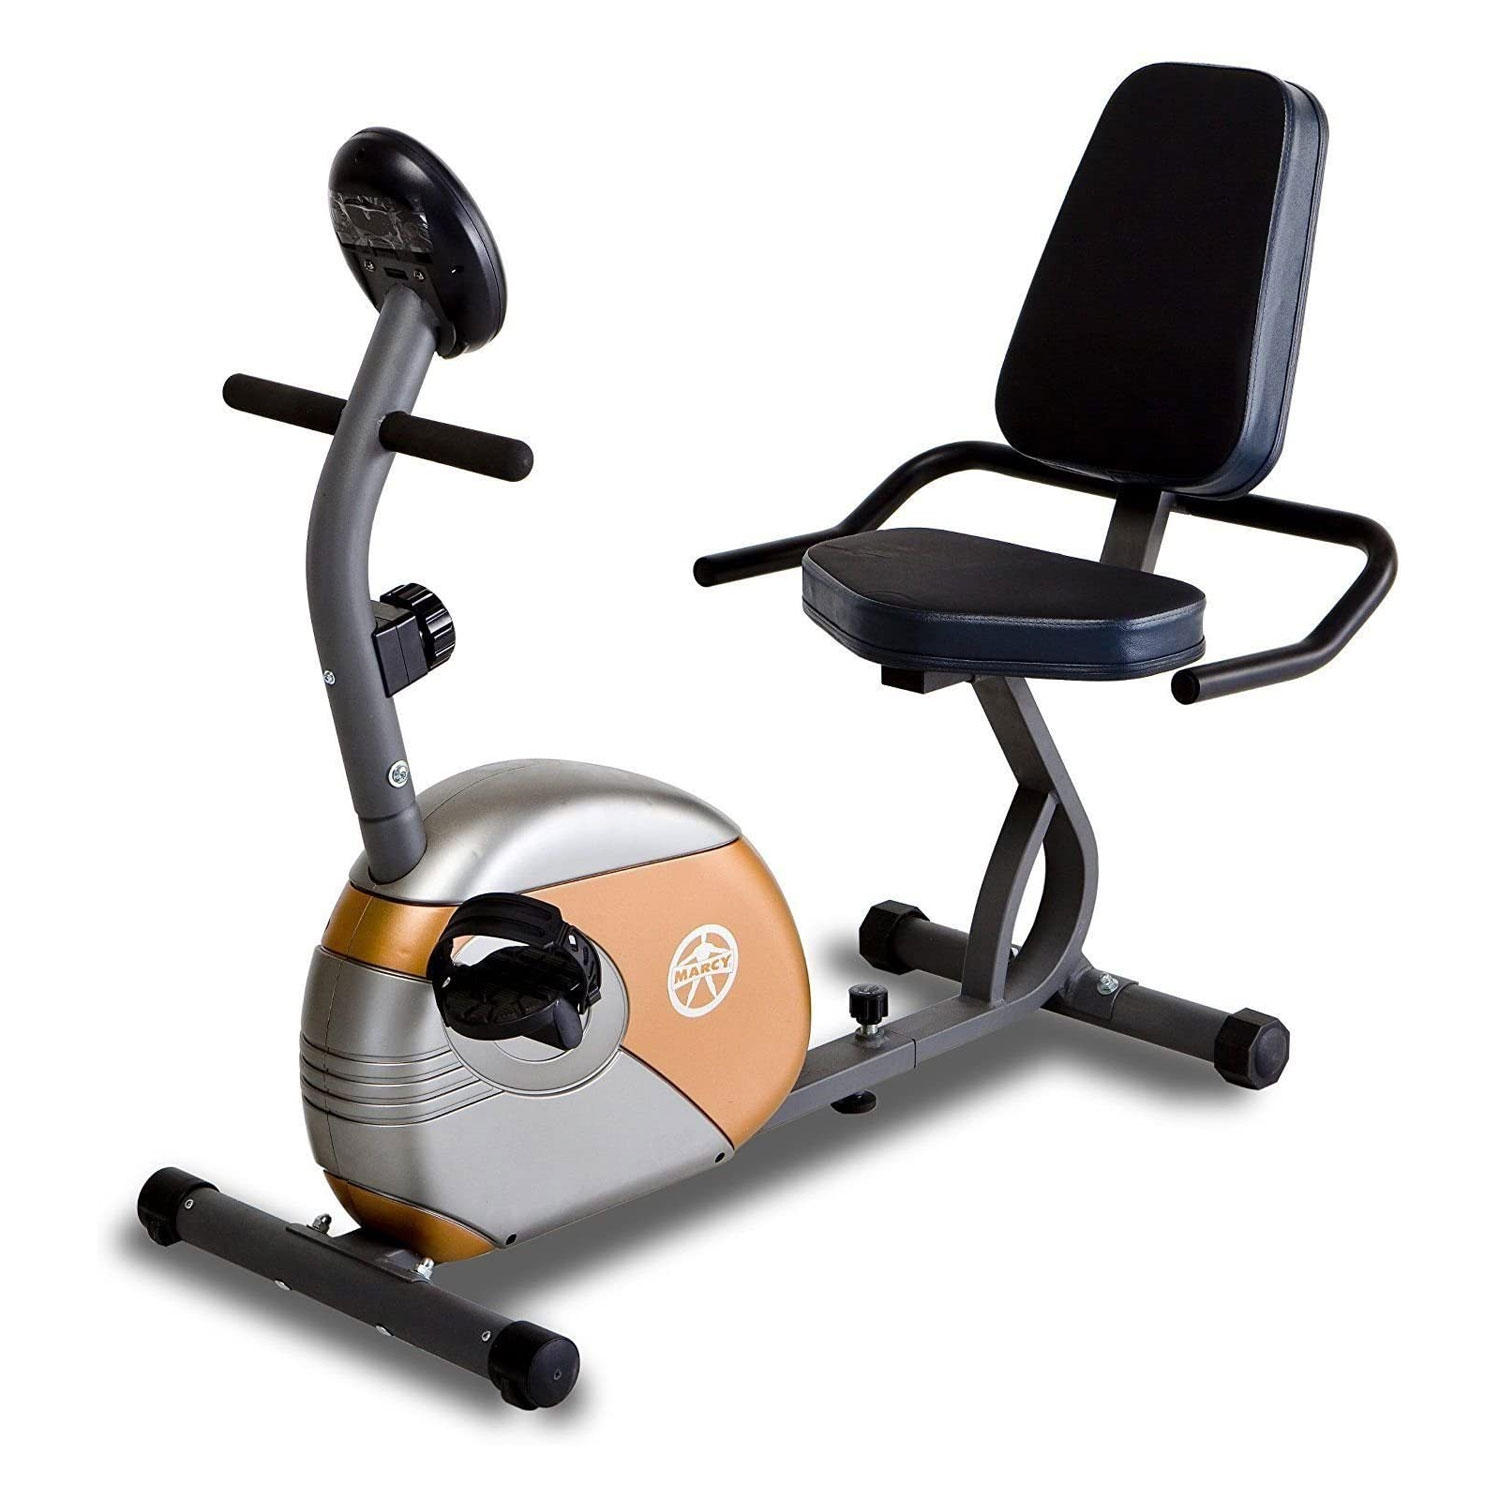 Marcy ME709 Recumbent Magnetic Exercise Bike Cycling Home Gym Equipment - image 3 of 5